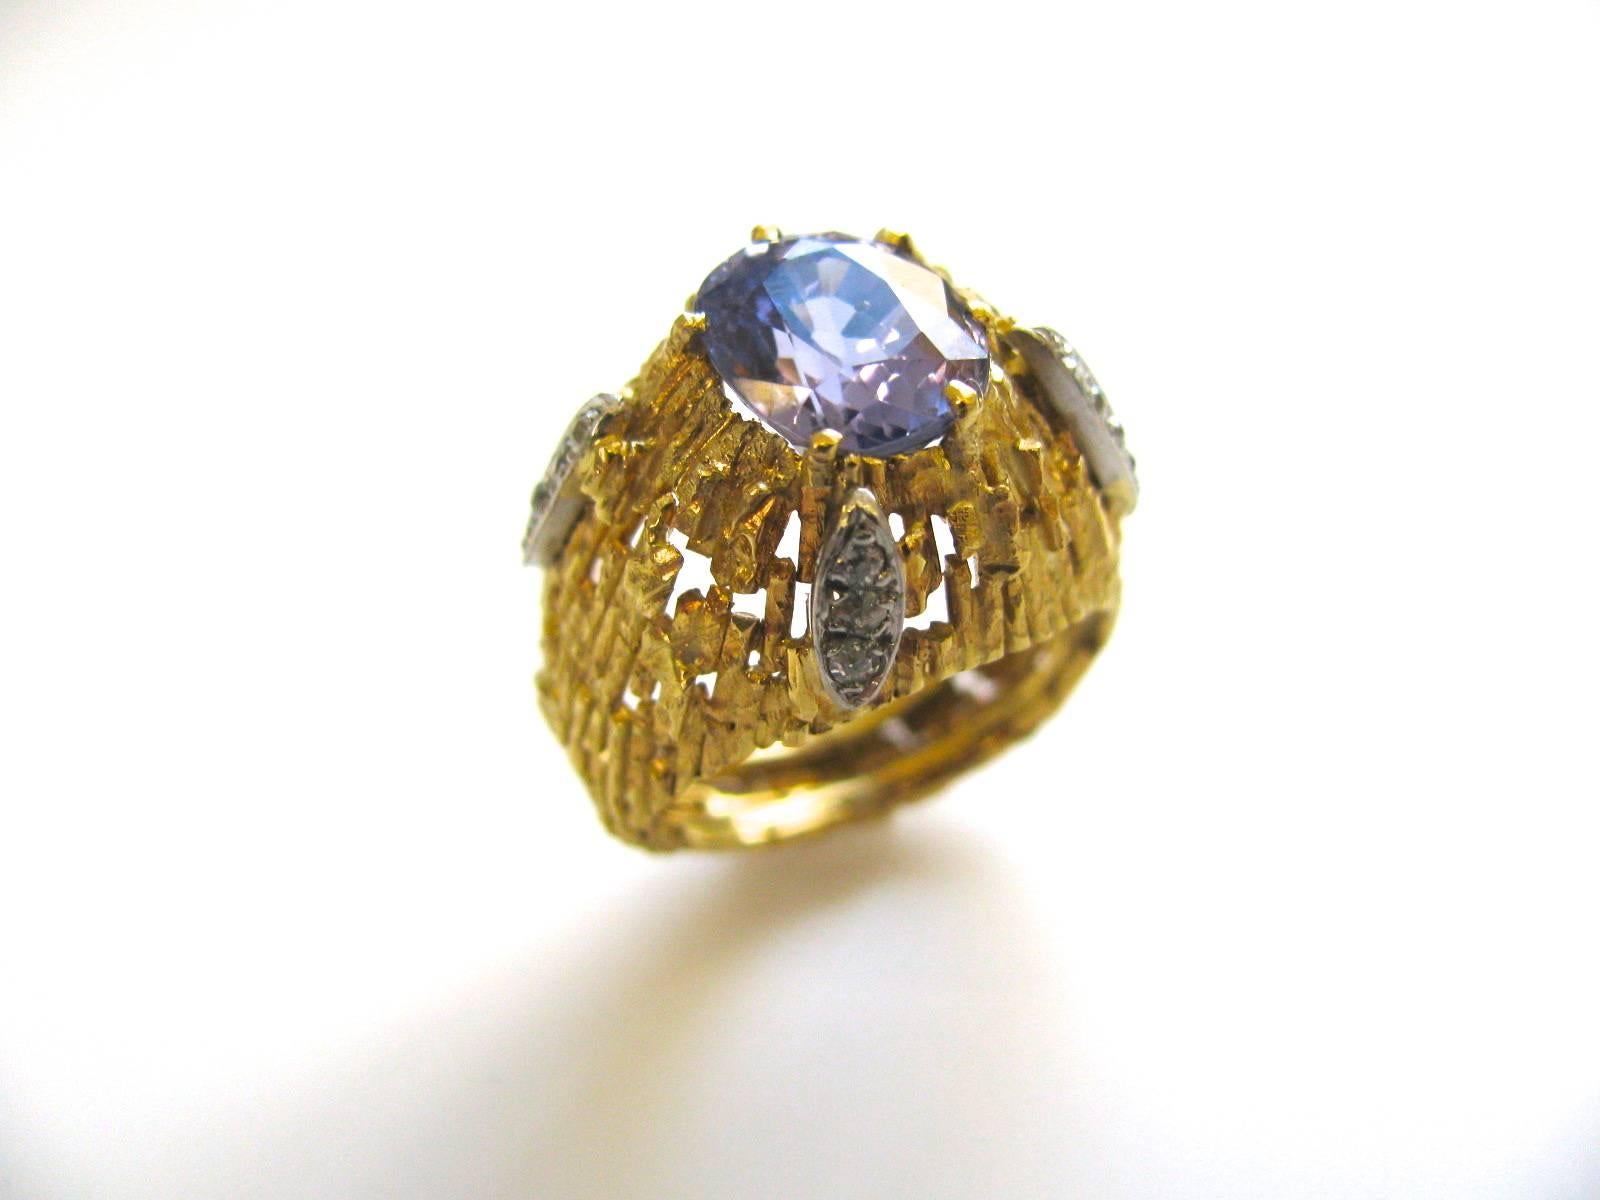 A beautiful Andrew Grima Lavender Sapphire Ring. The 5/8